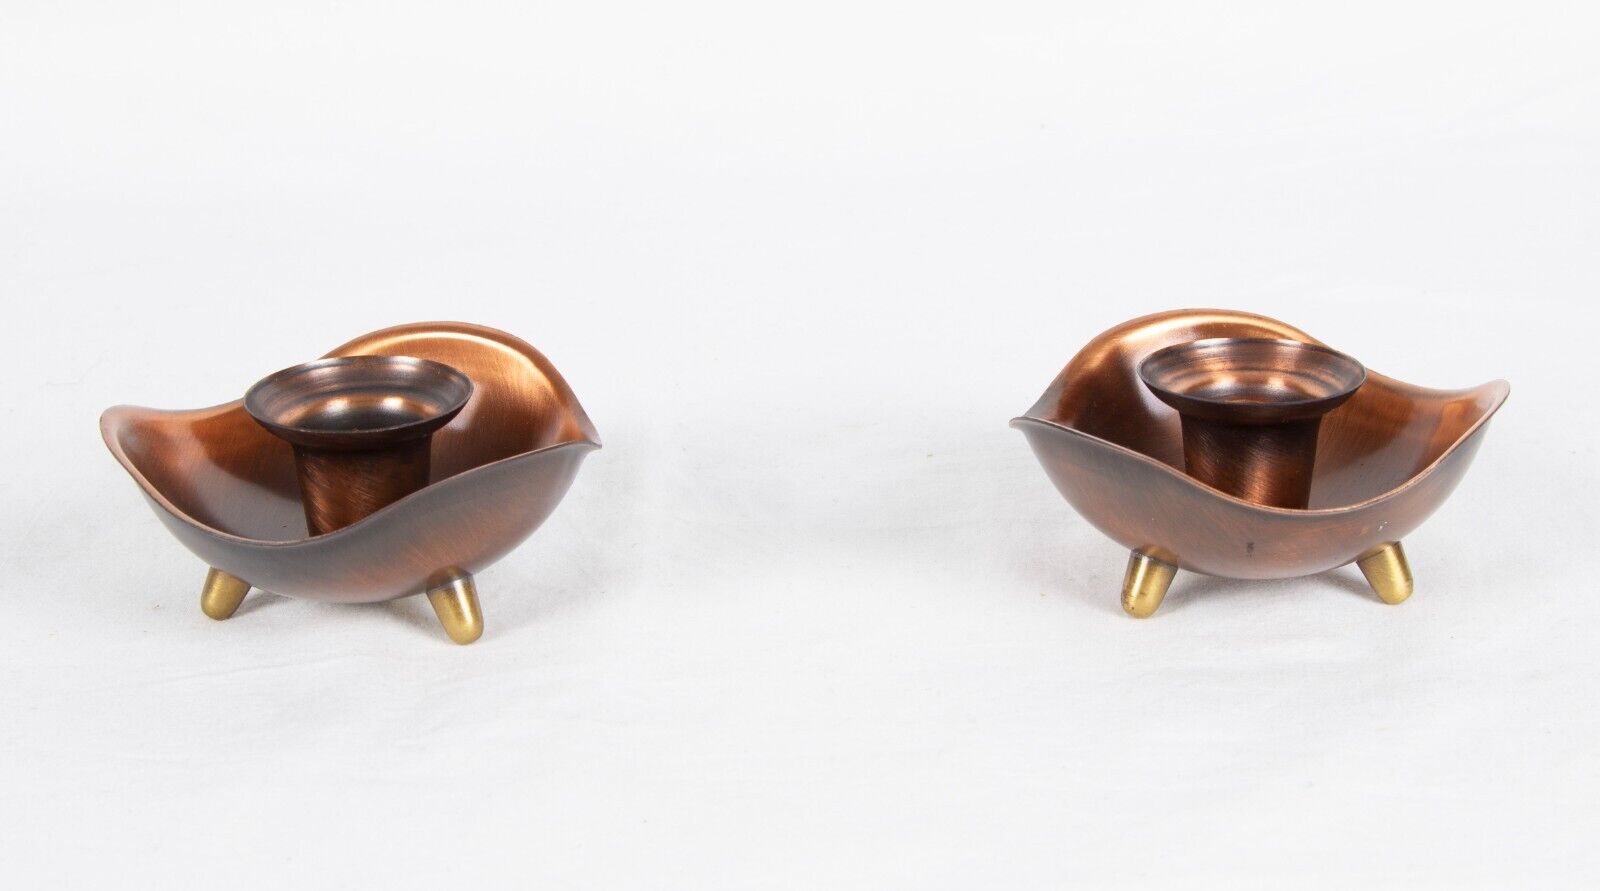 Pair of copper candle holders, from Coppercraft Guild